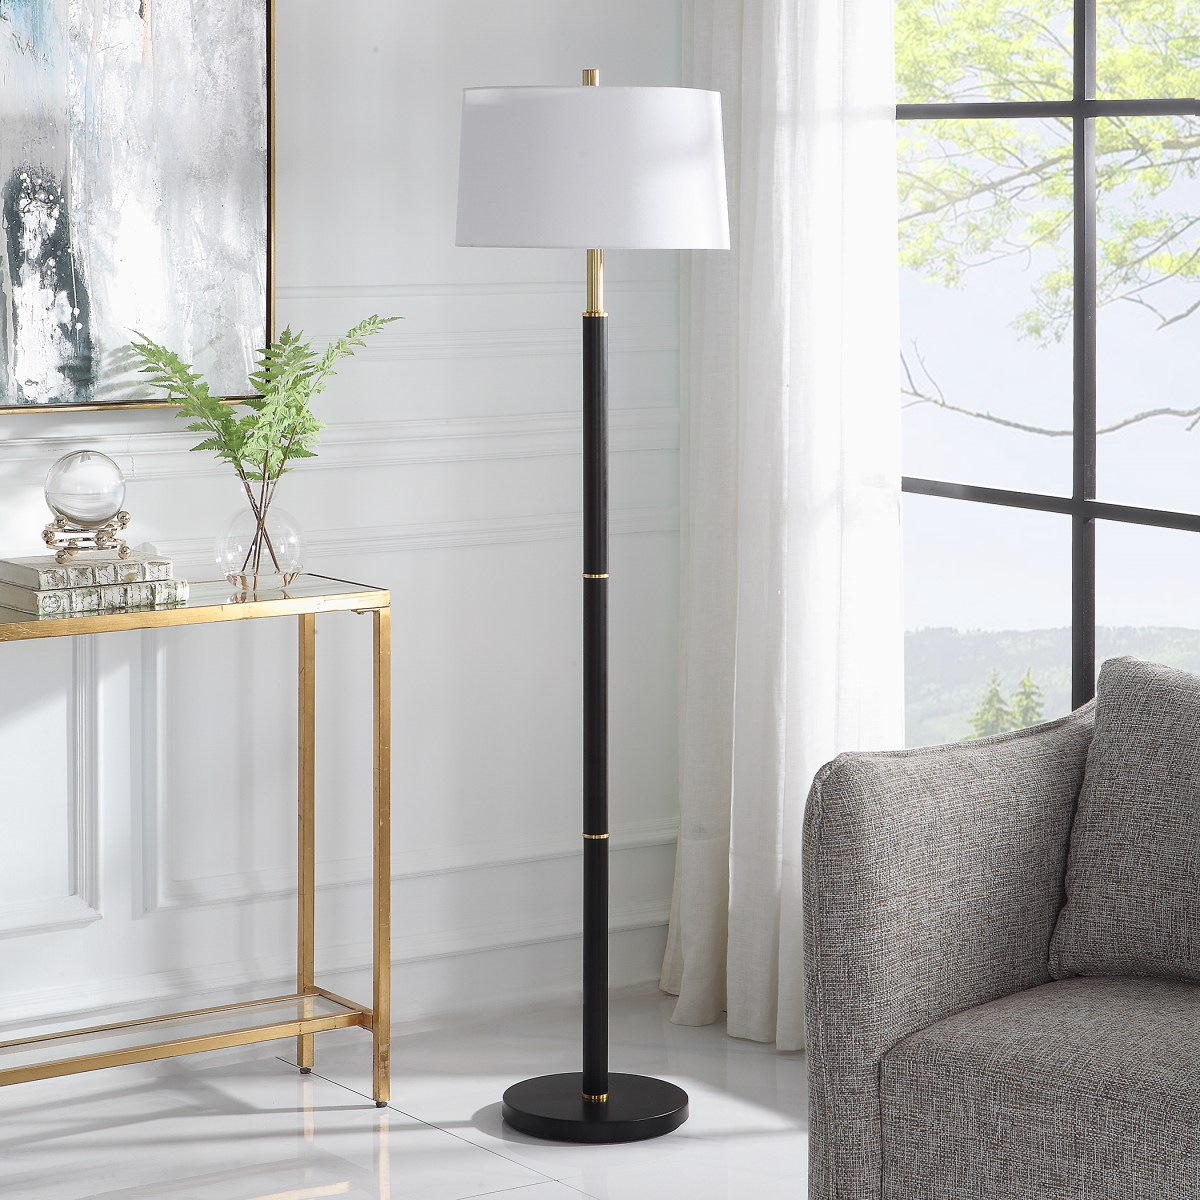 Picture of 212 Main W26103-1 62 x 9 x 16 in. Floor Lamp&#44; Black & Gold